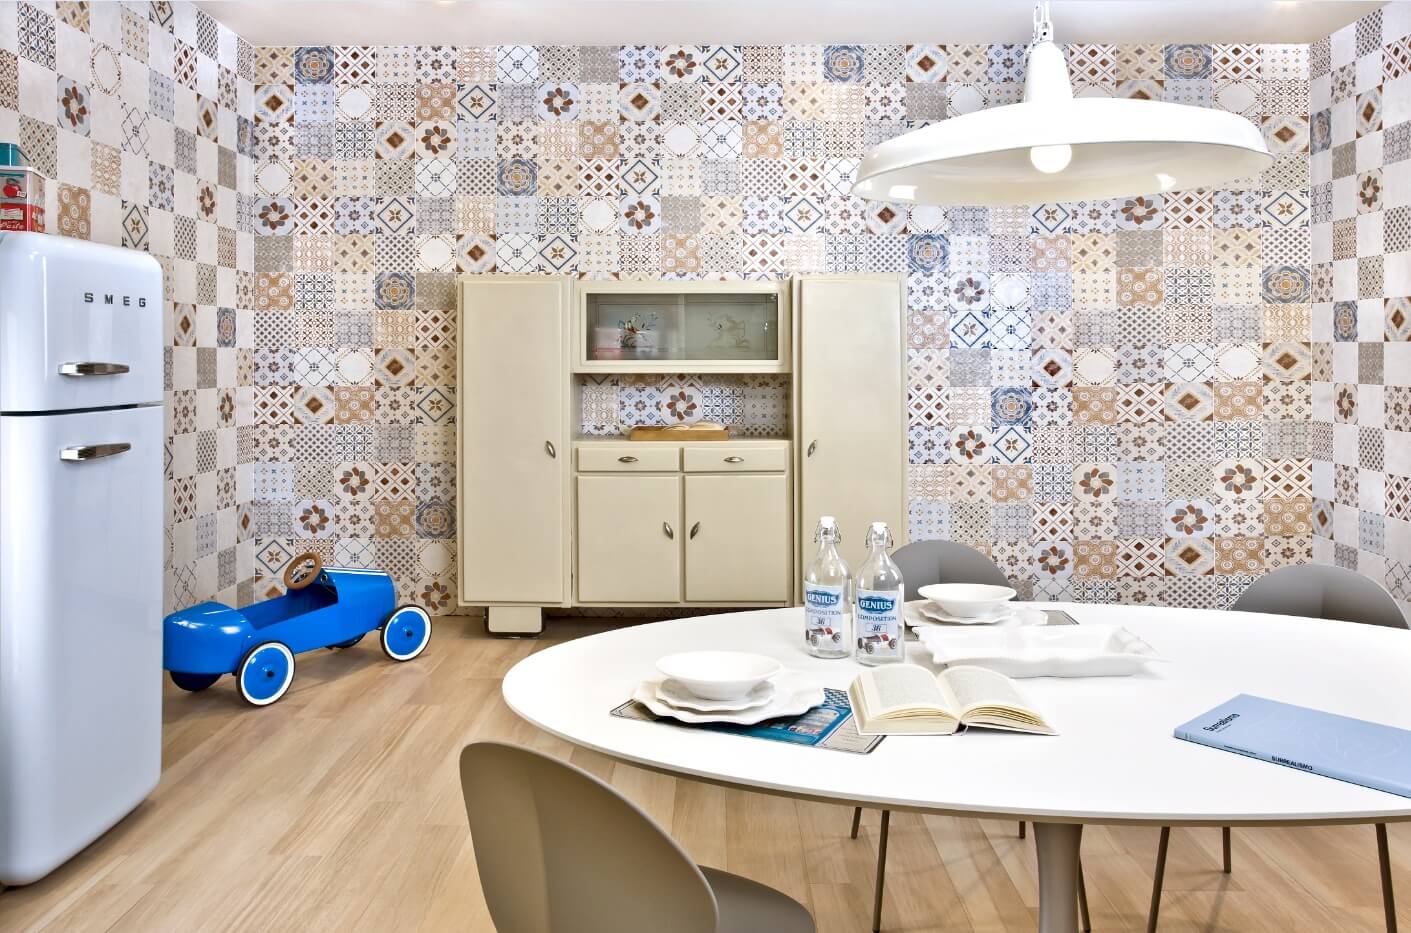 Amarcord, the tile collection perfect for furnishing